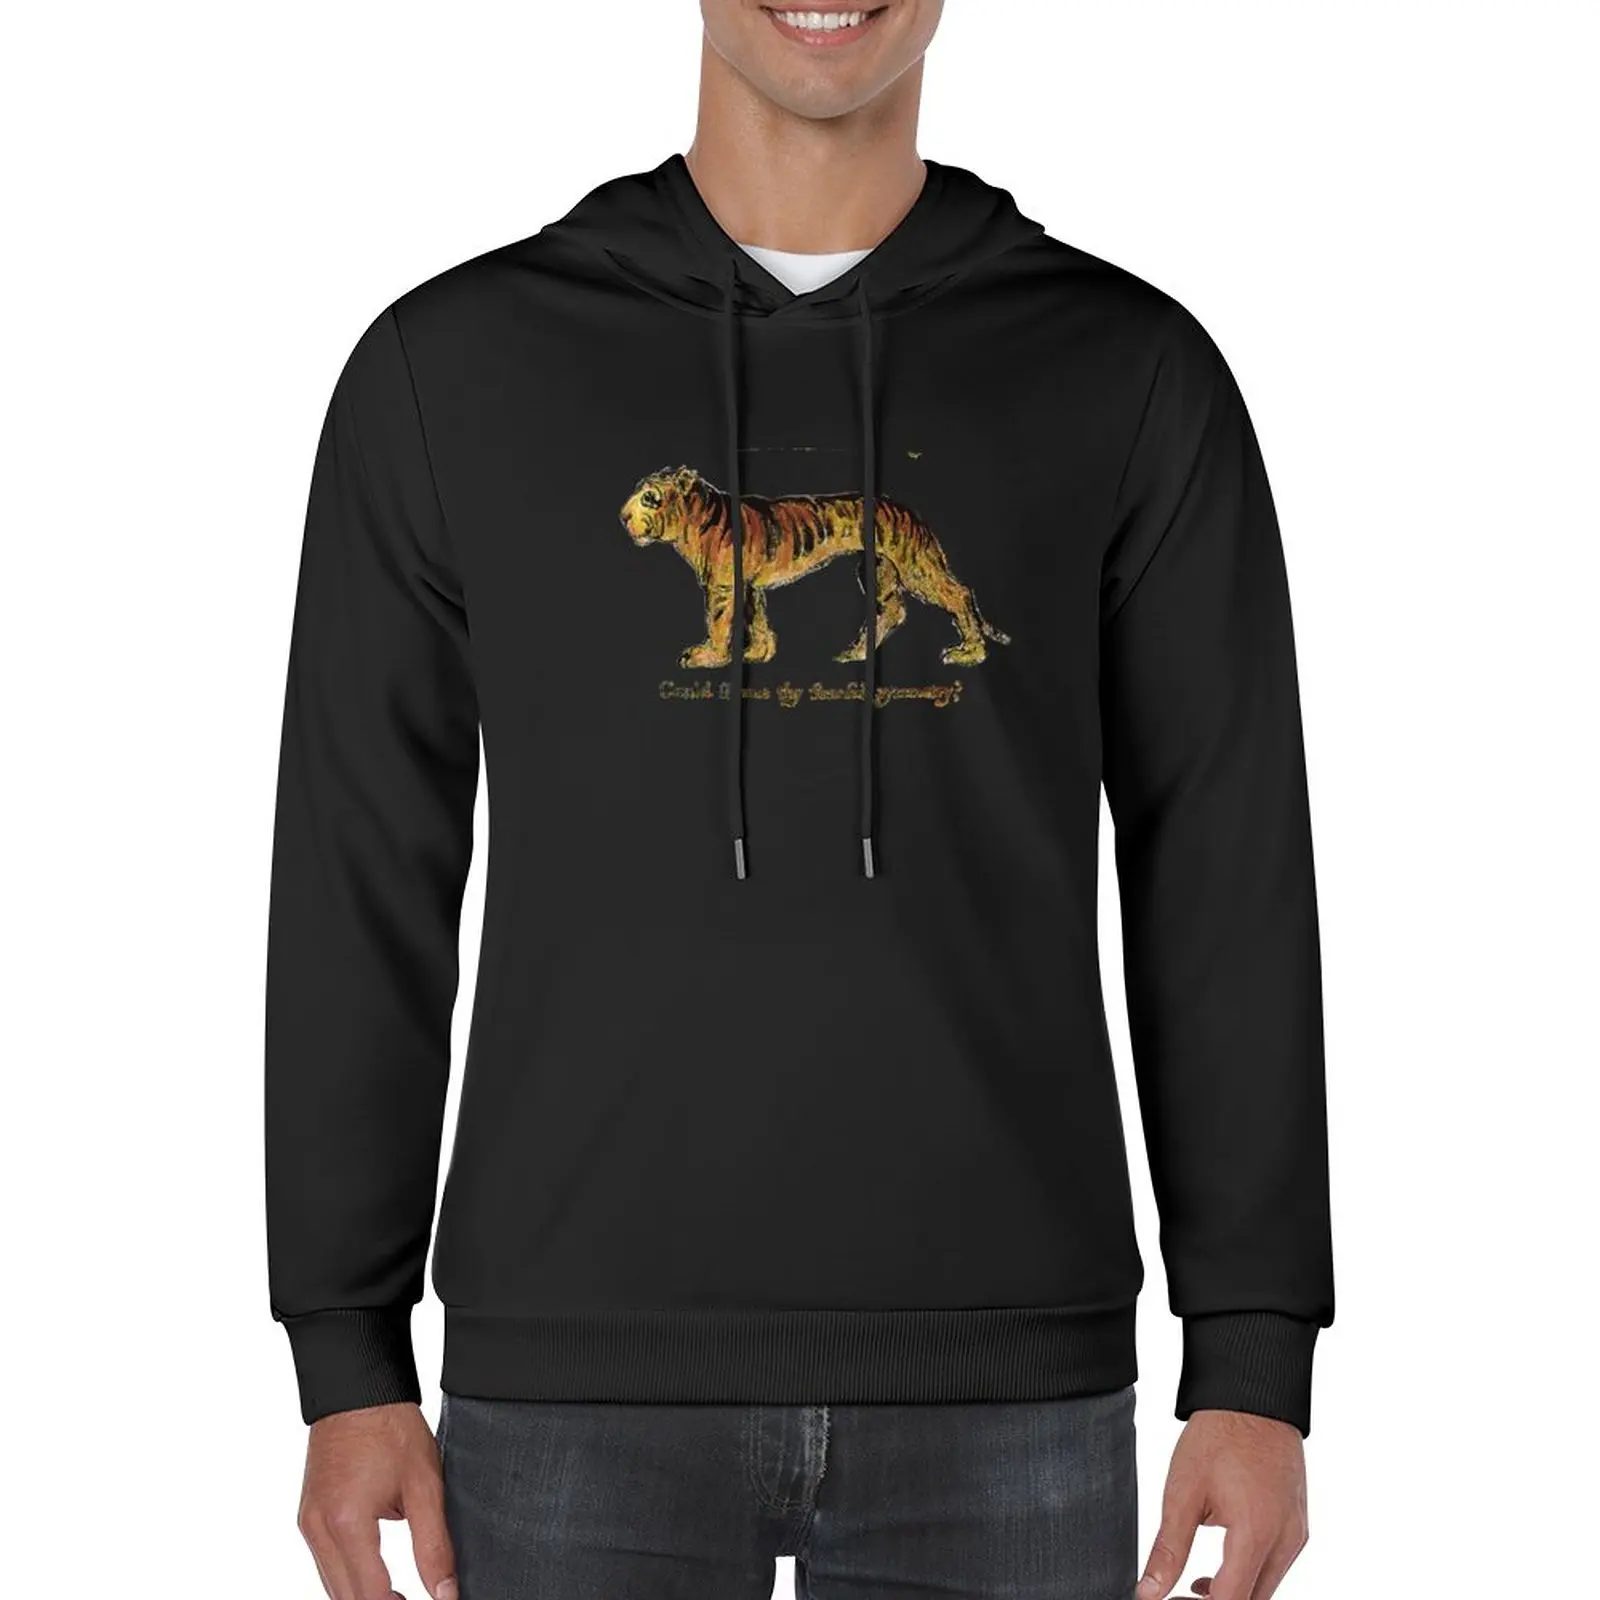 

New William Blake: The Tyger Pullover Hoodie men wear anime clothing korean style clothes hoodies and sweatshirts new